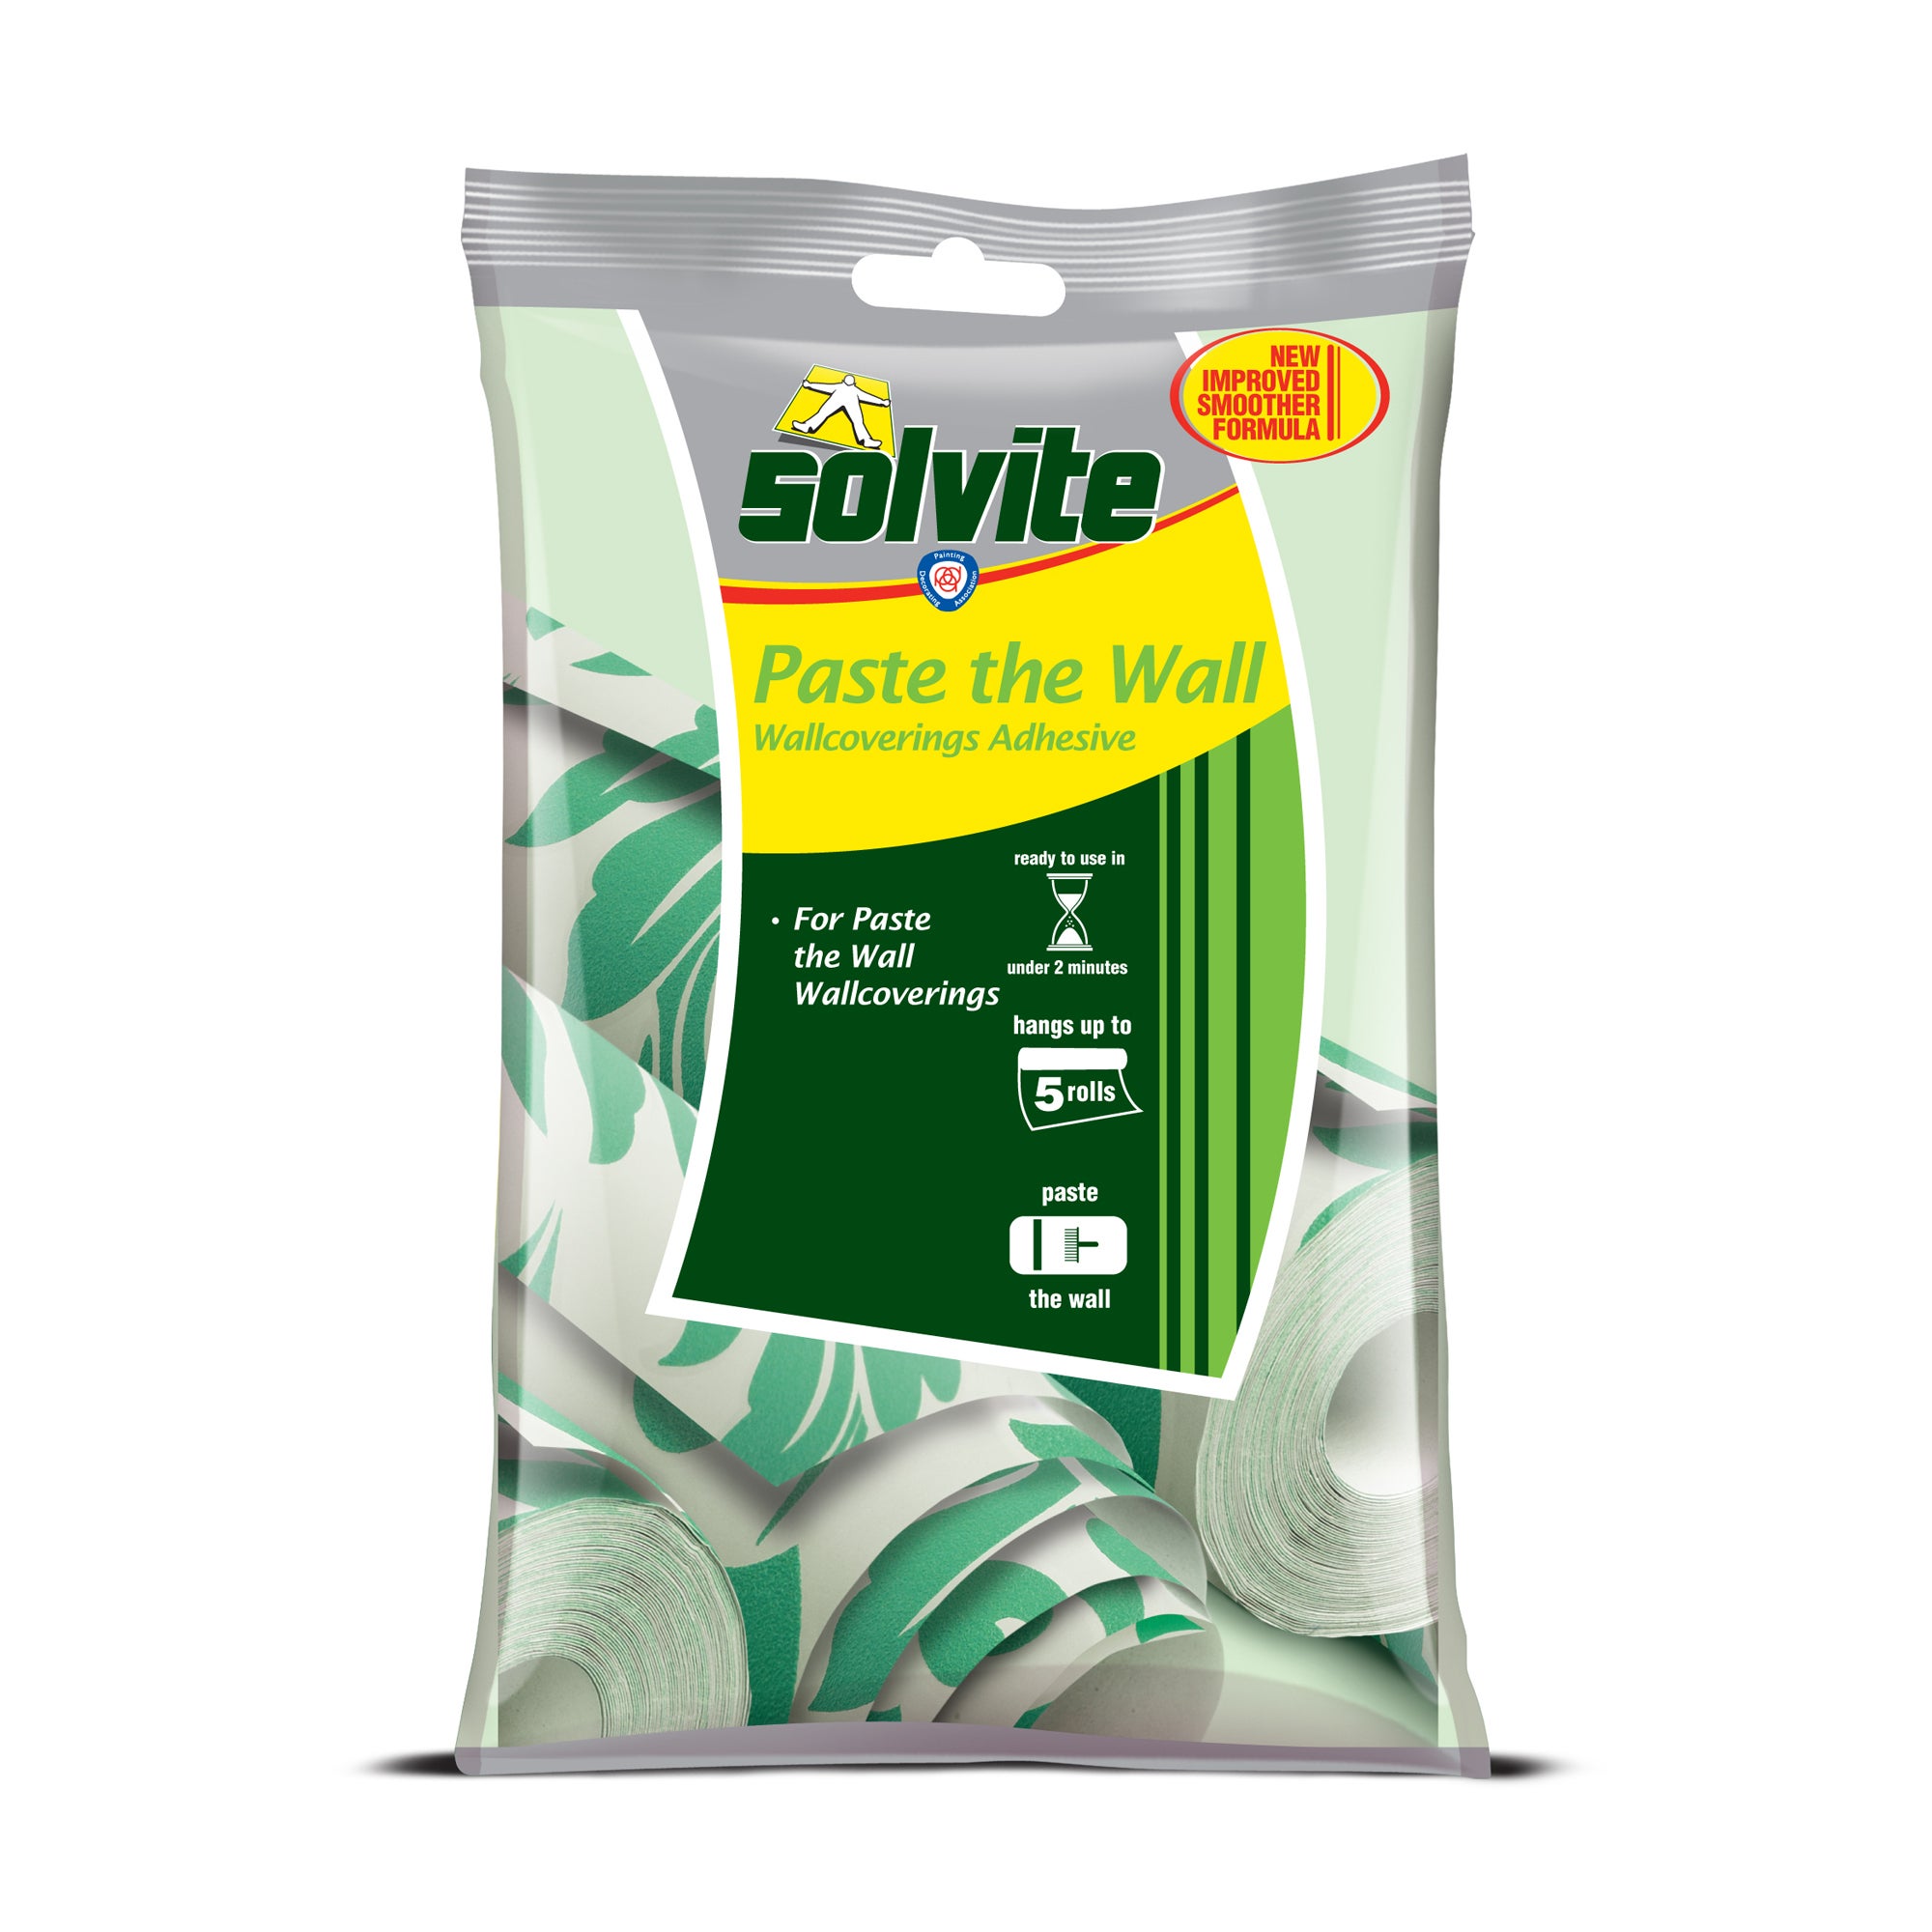 Solvite Paste the Wall Adhesive 5 Rolls